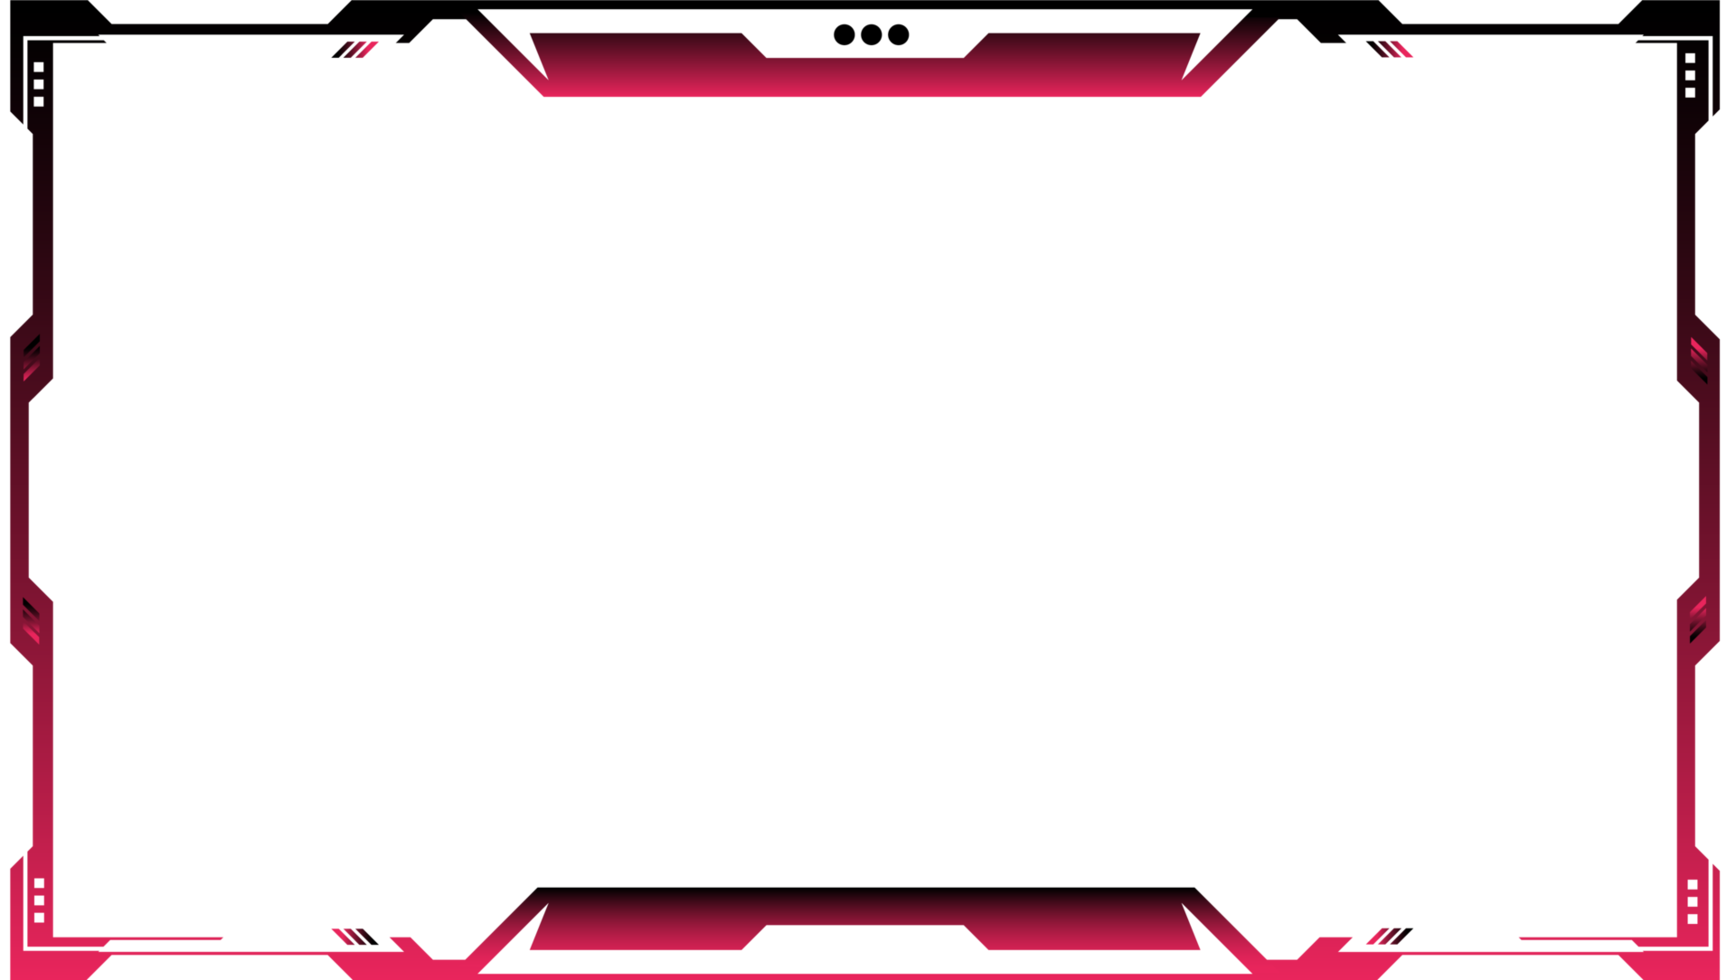 Futuristic gaming overlay PNG with creative shapes. Live streaming overlay design with red and white color shapes. Streaming overlay frame and screen interface decoration for online gamers.